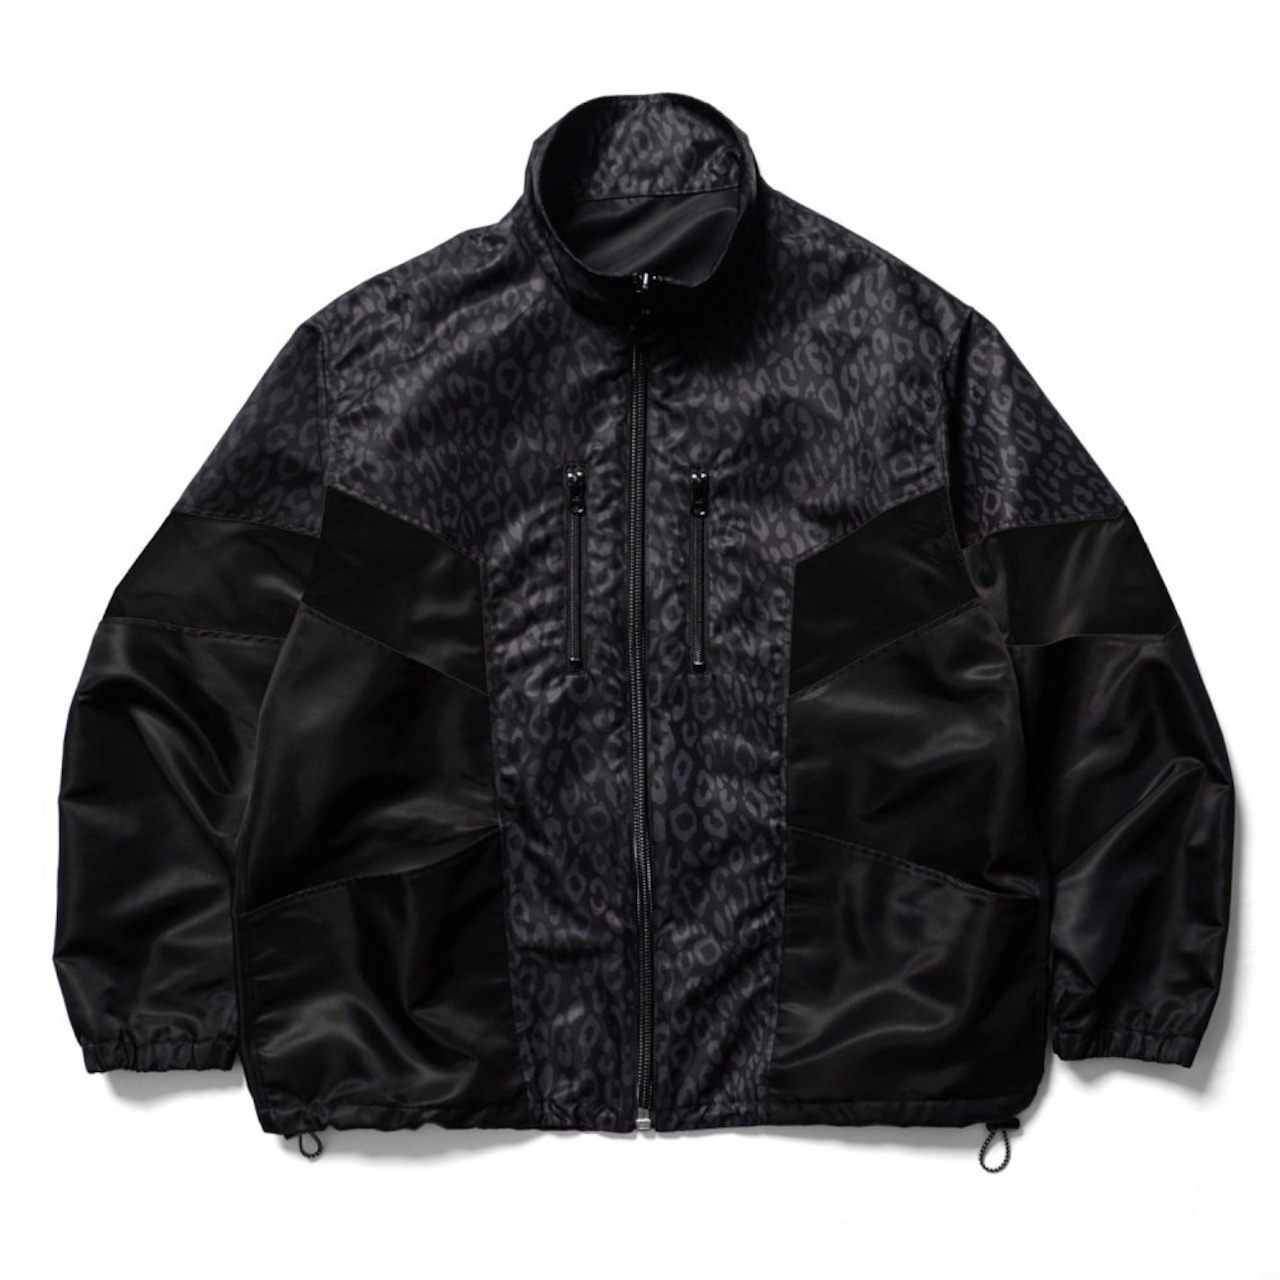 ”PANTHER” TRACK JACKET